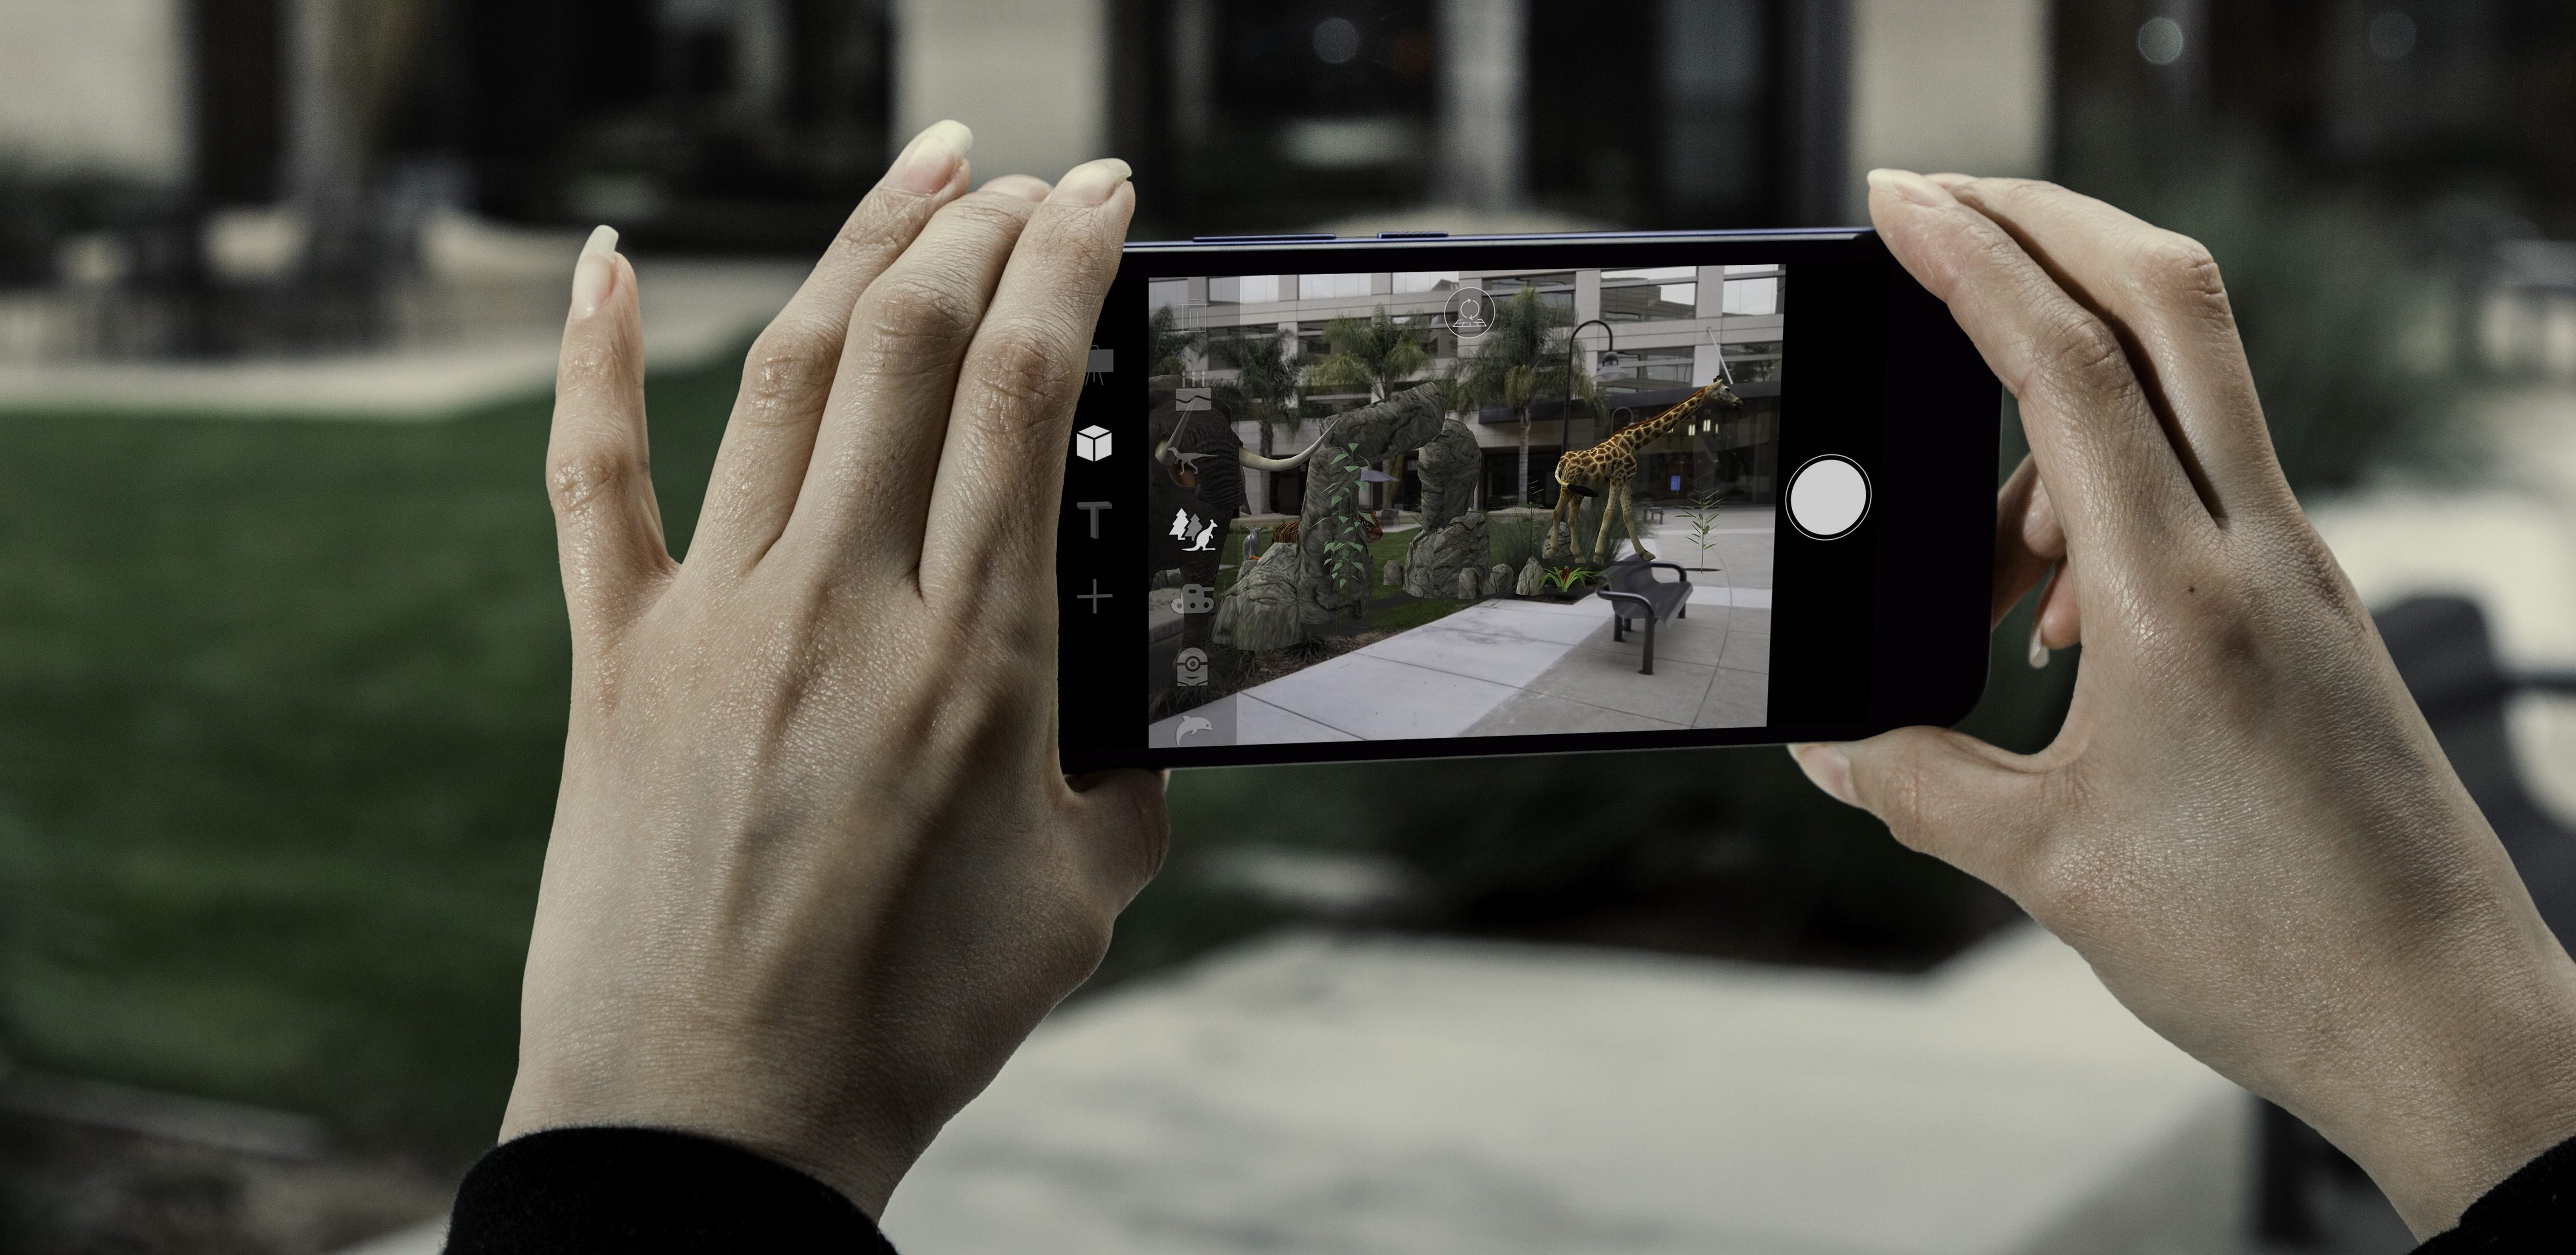 Beta Version of uSensAR Offers Game Developer the First Augmented Reality Platform for Low-Tier Smartphones